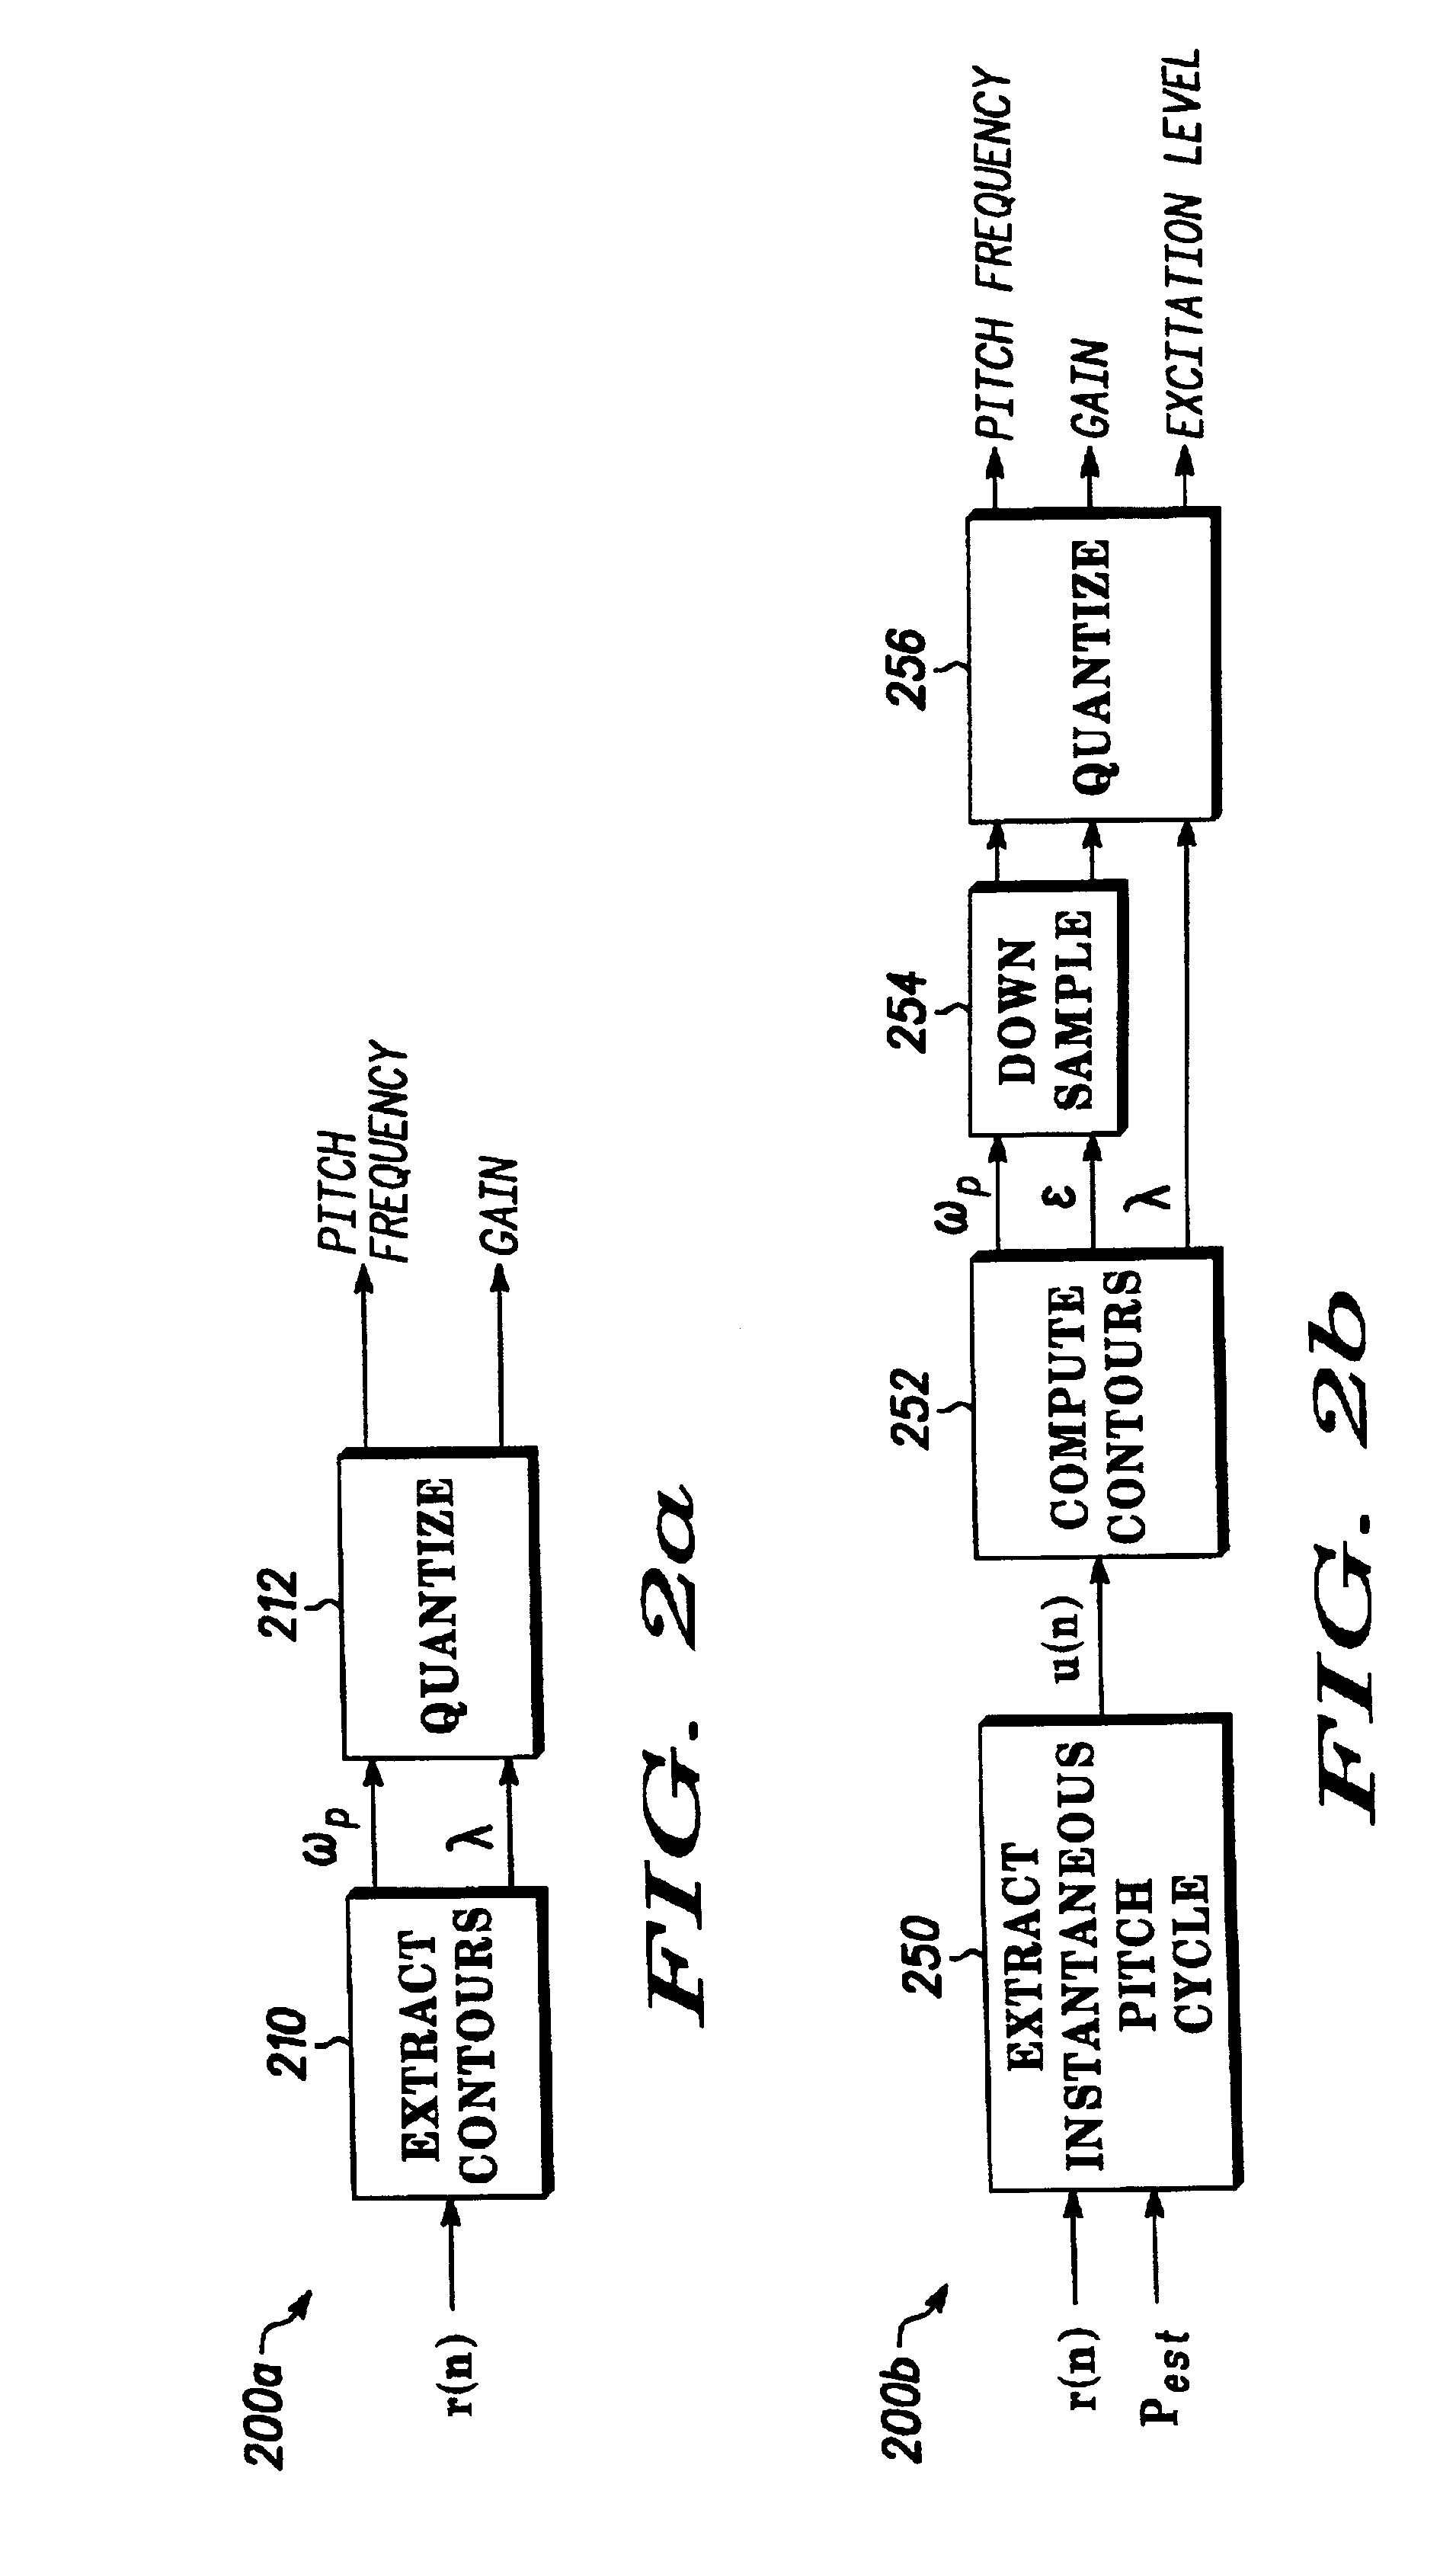 Phase excited linear prediction encoder